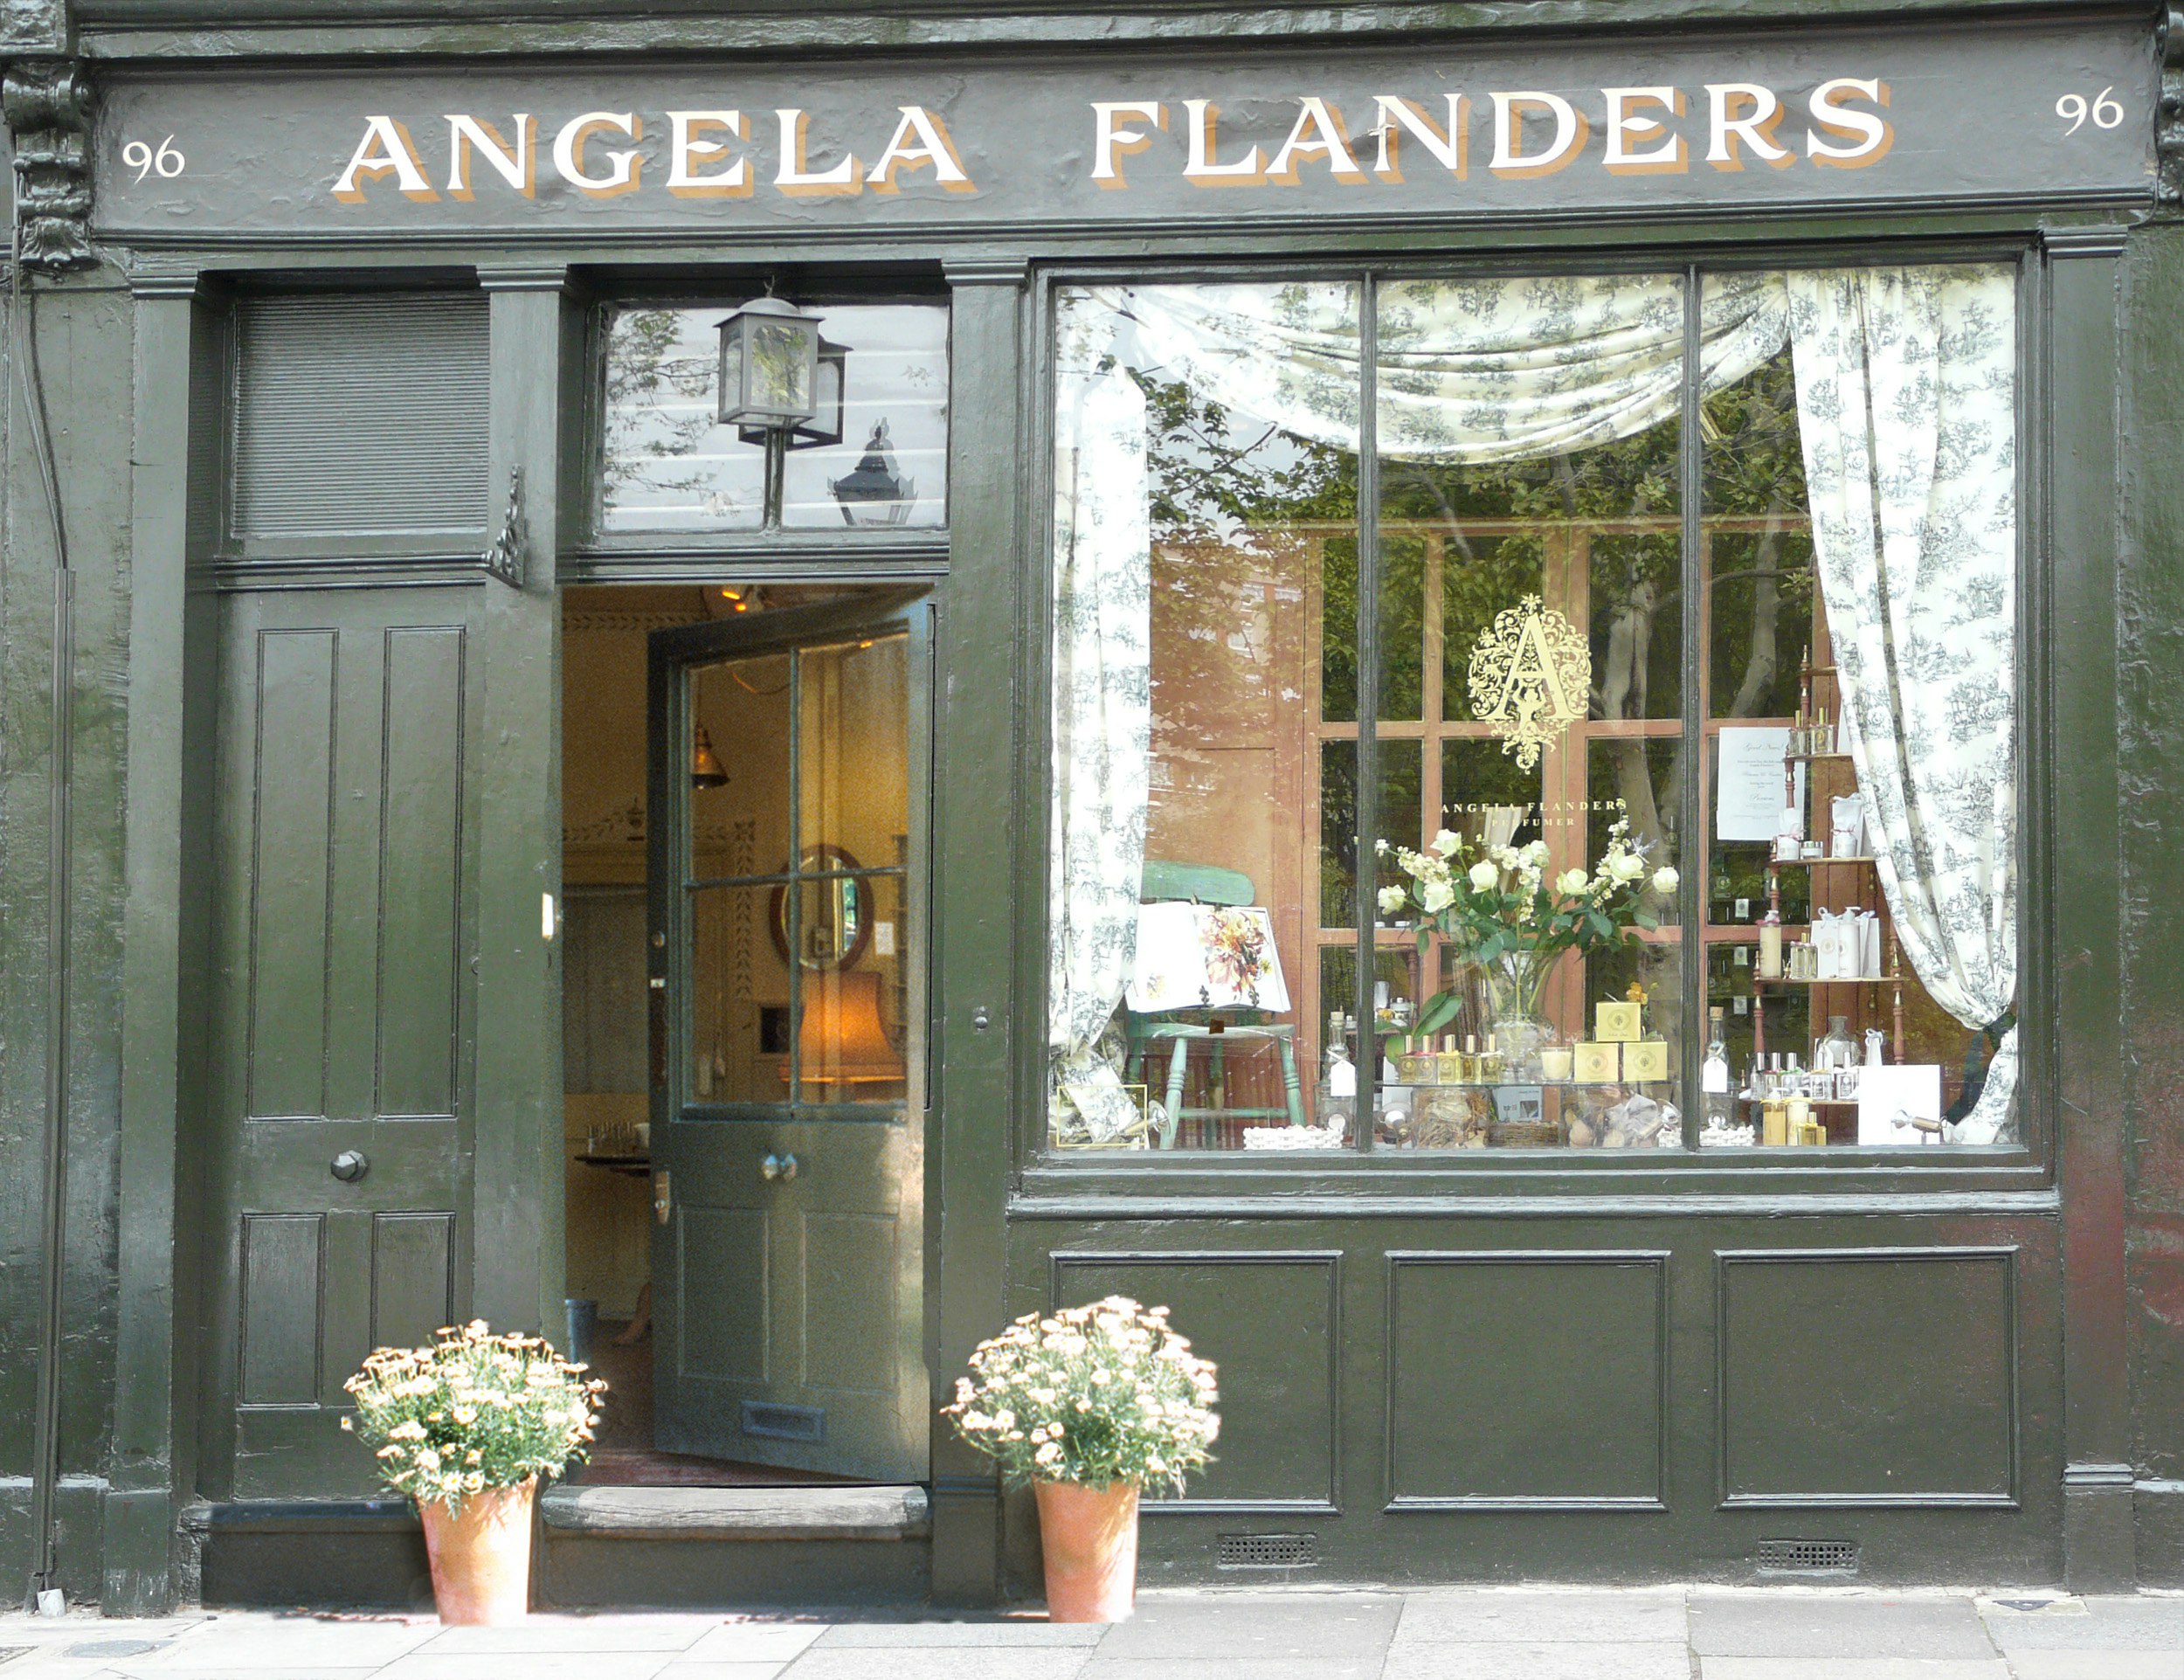 The green Angela Flanders storefront in east London, with curtained windows displaying flowers and perfume inside.